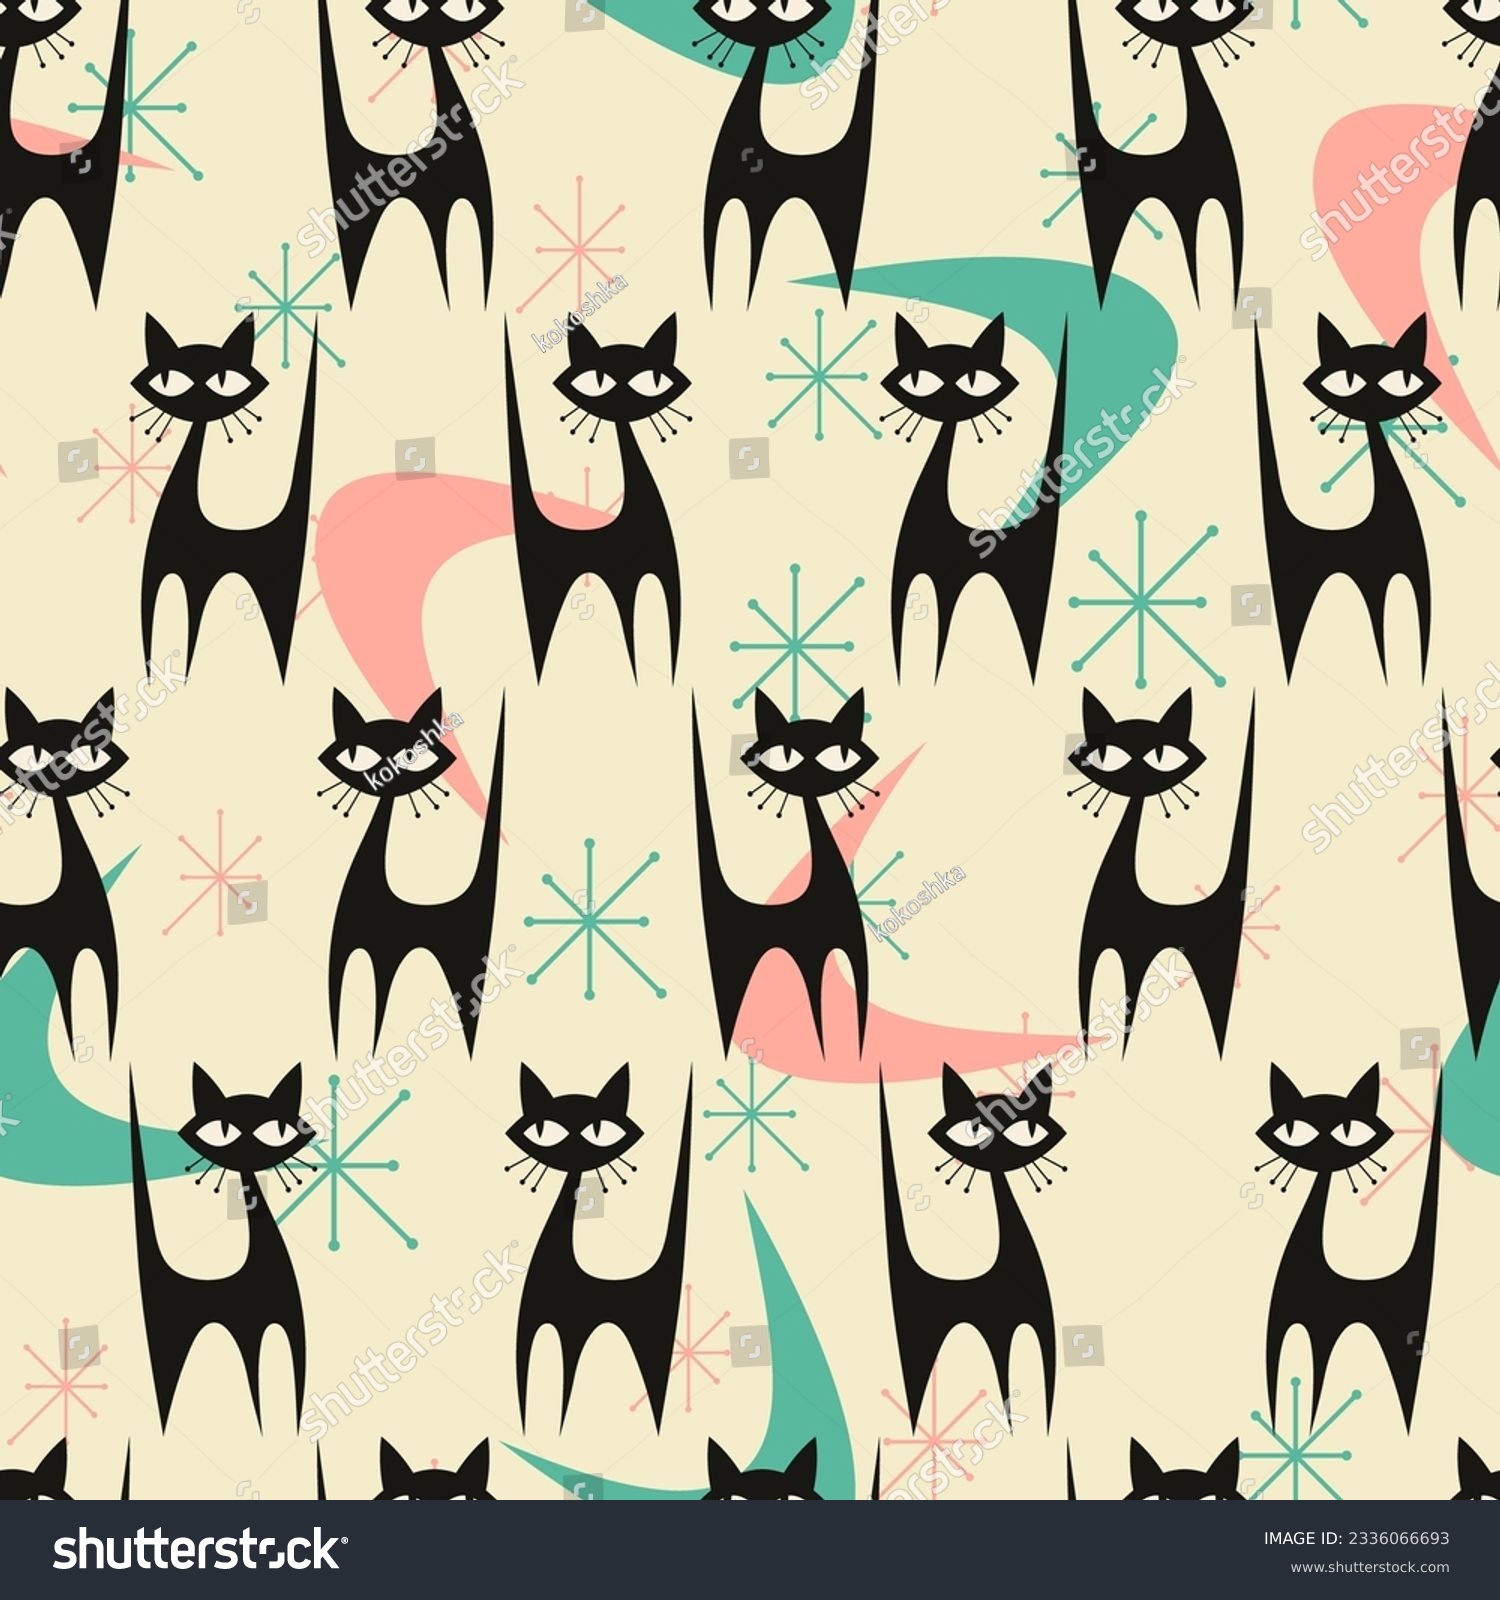 SVG of Mid Century colorful Modern Cat Silhouette with Atomic age Starbursts. Vector seamless background in fifties style. svg